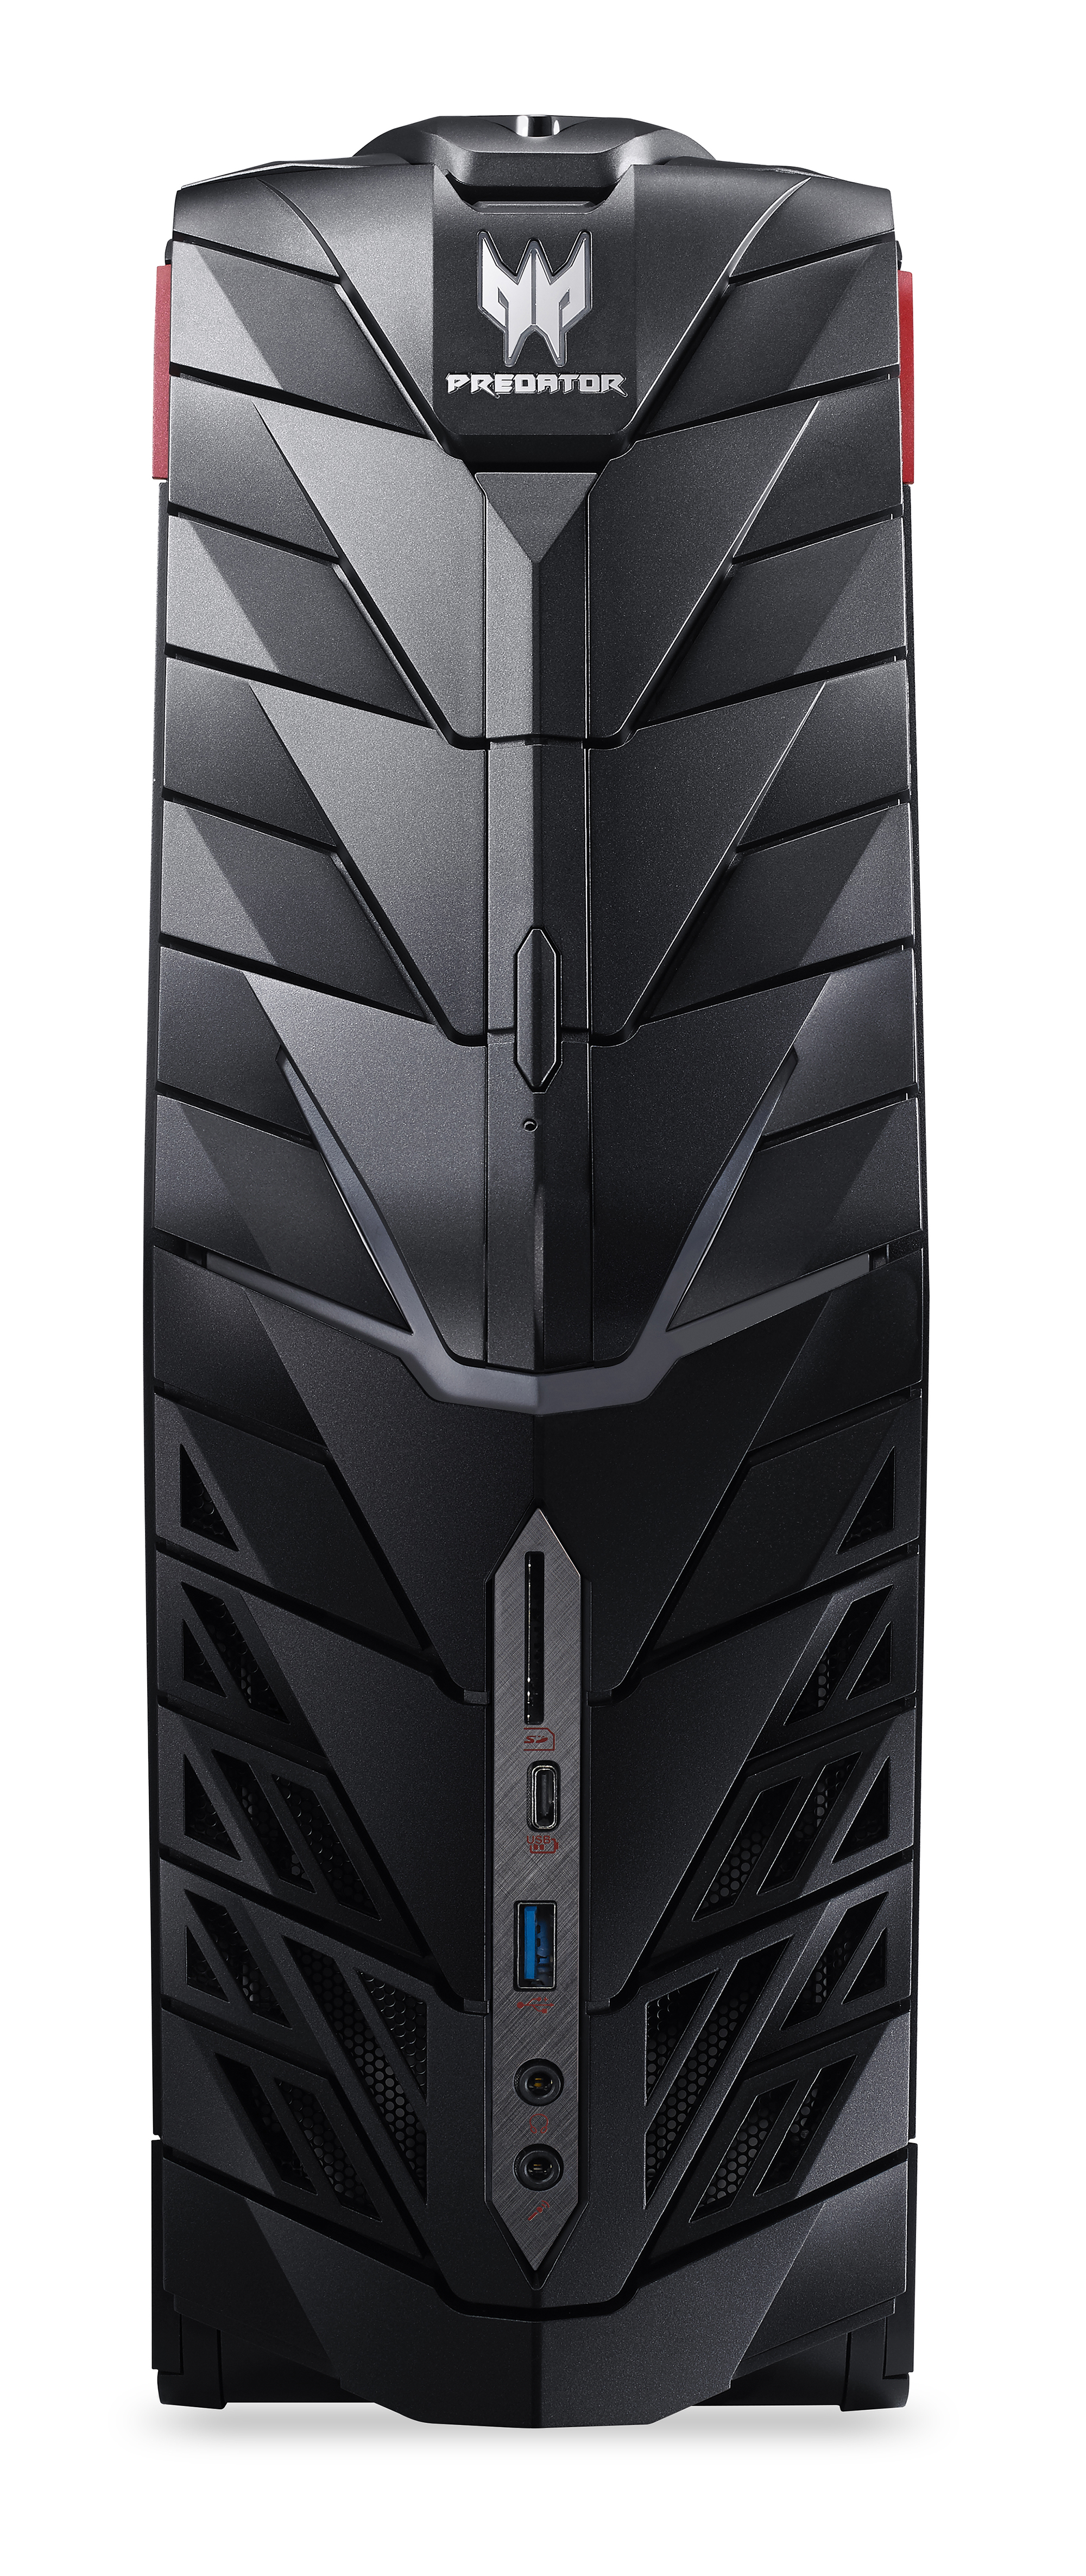 The Acer Predator G1 with Windows 10